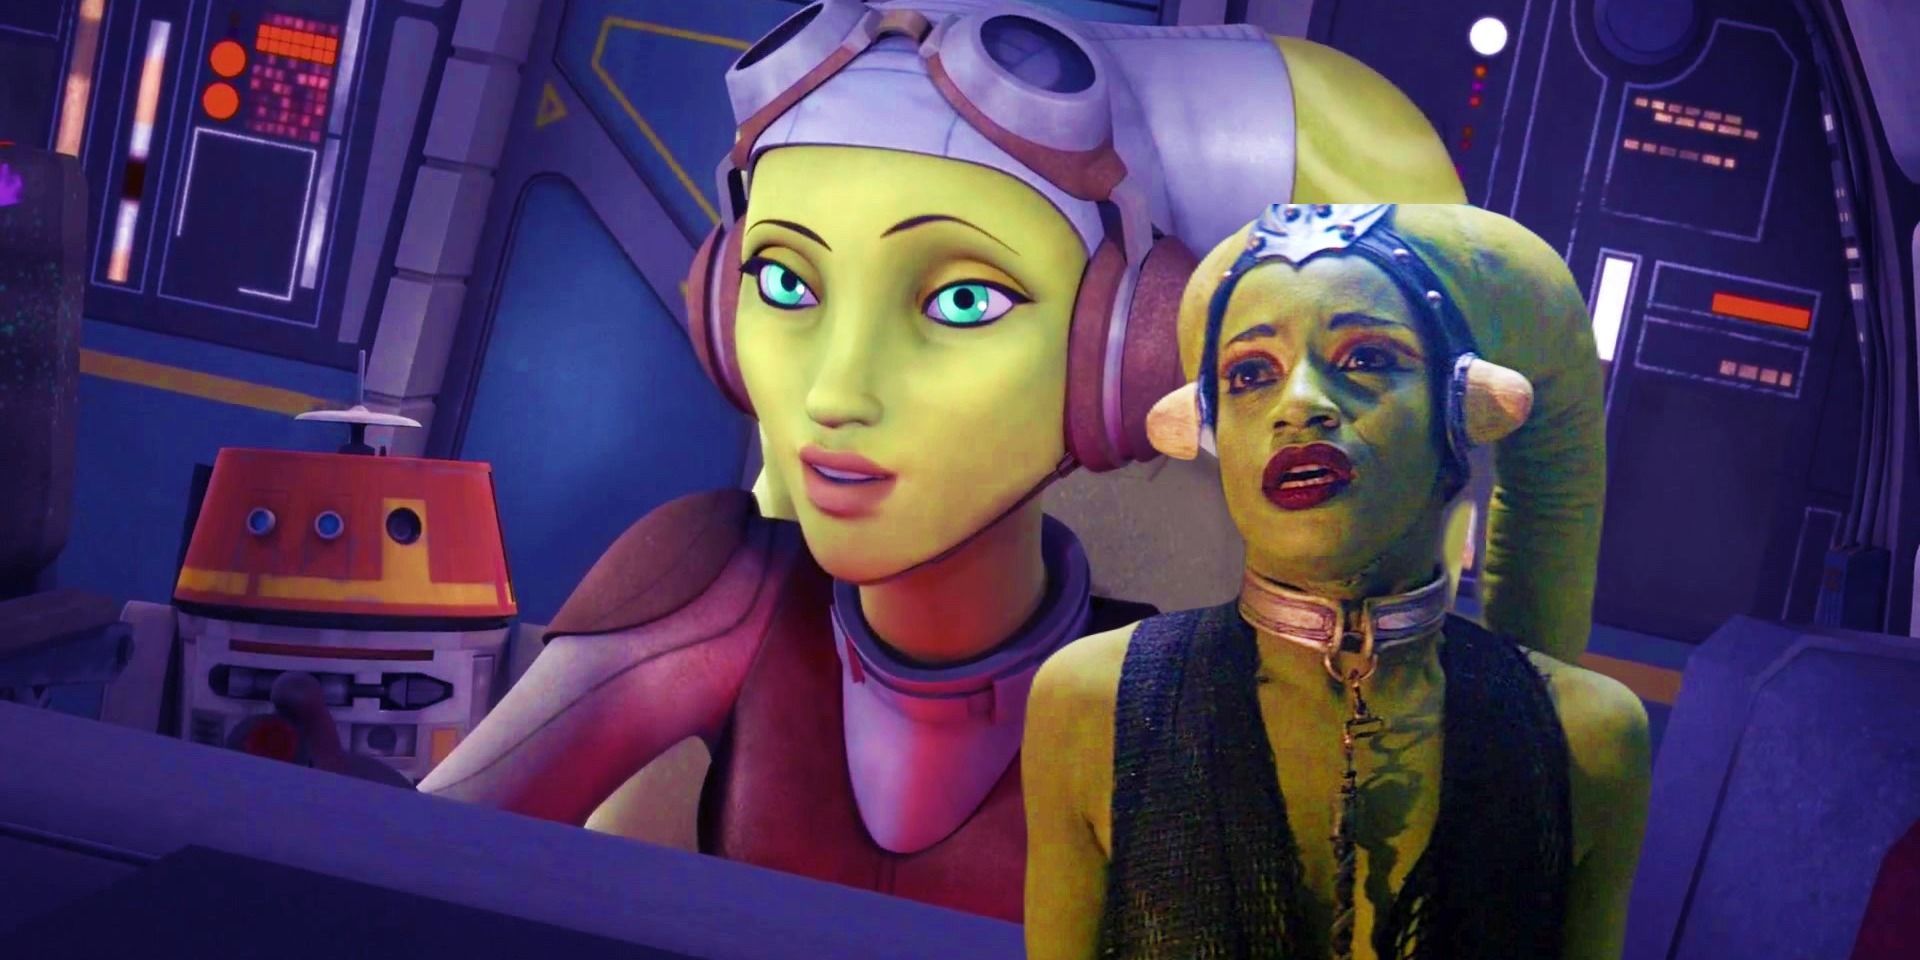 Hera flying the Ghost with Chopper behind her from Star Wars Rebels in the background with Oola from Return of the Jedi in the foreground